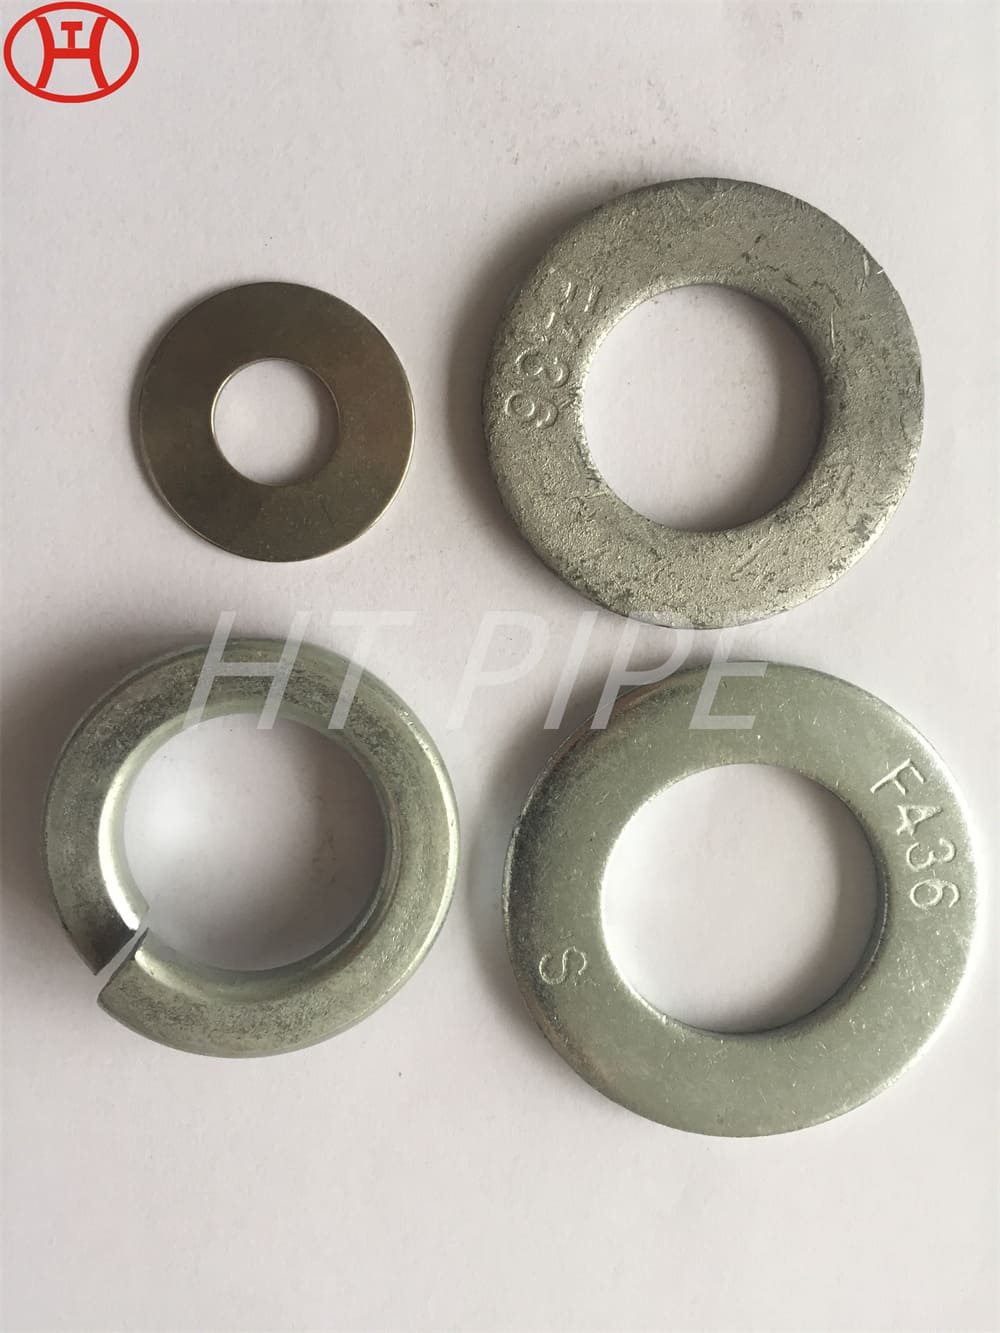 Nickel Alloy 80a UNS N07080 Nimonic 80A nickel alloy washer price DIN125 Plain Washer